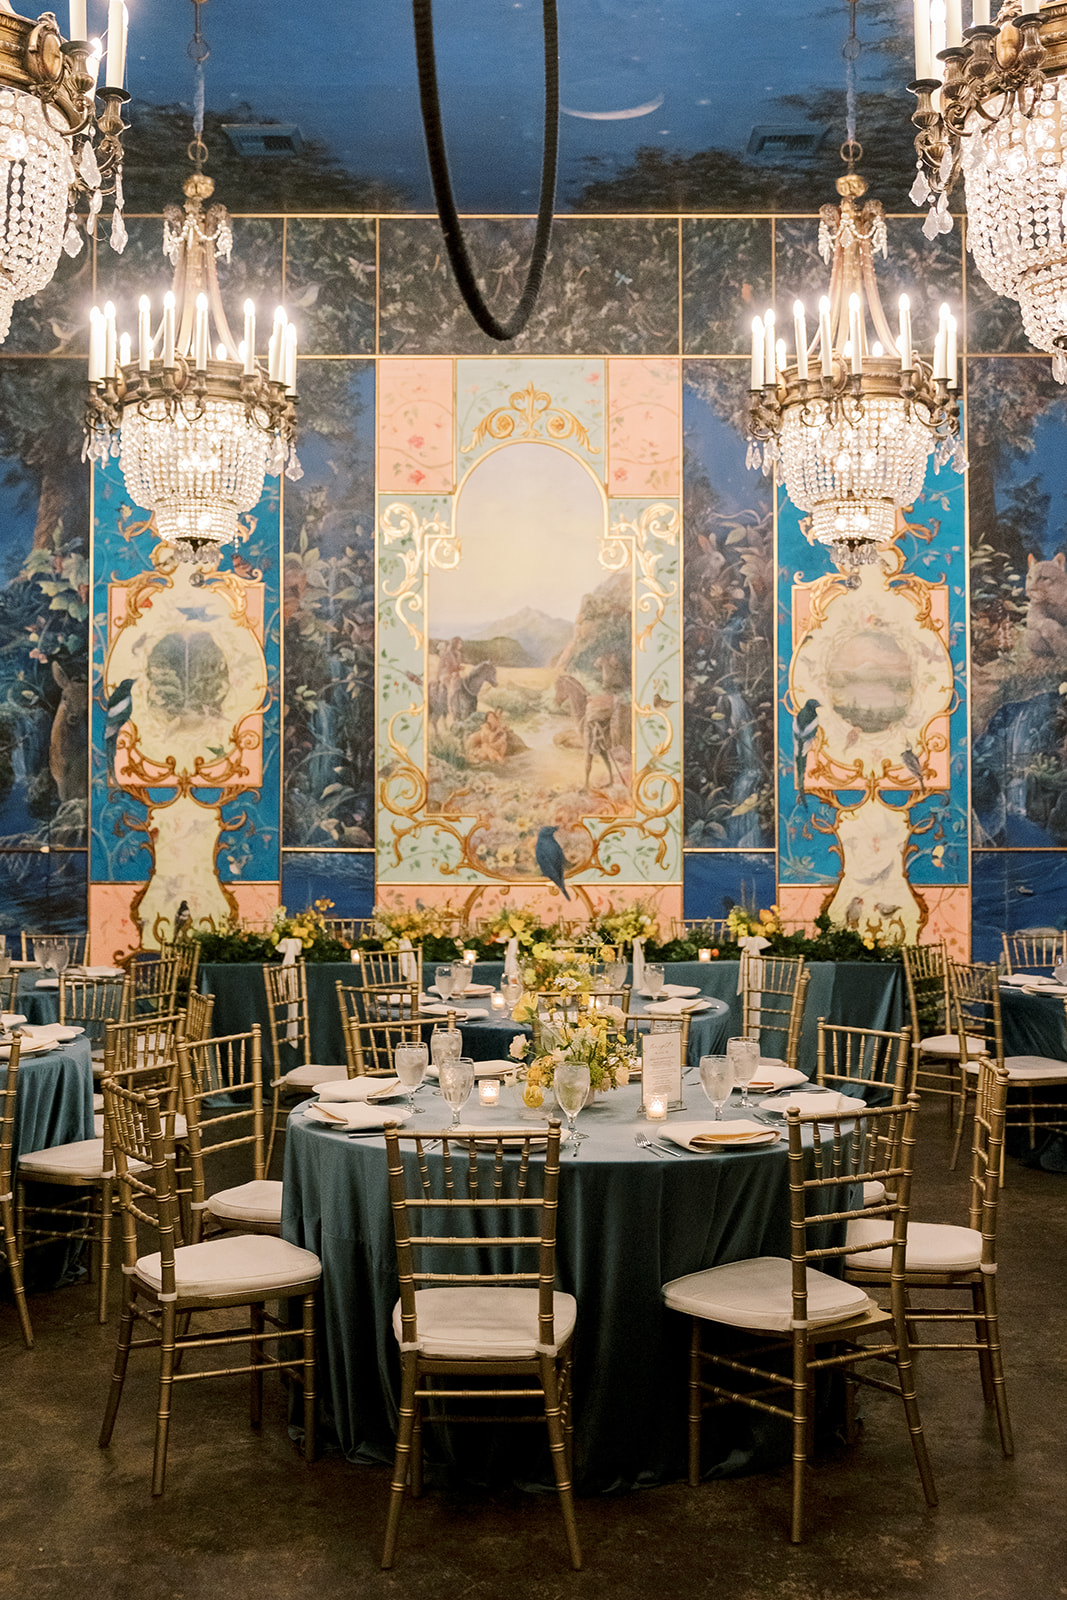 The Ruins wedding reception with crystal chandeliers and round tables with blue tablecloths 